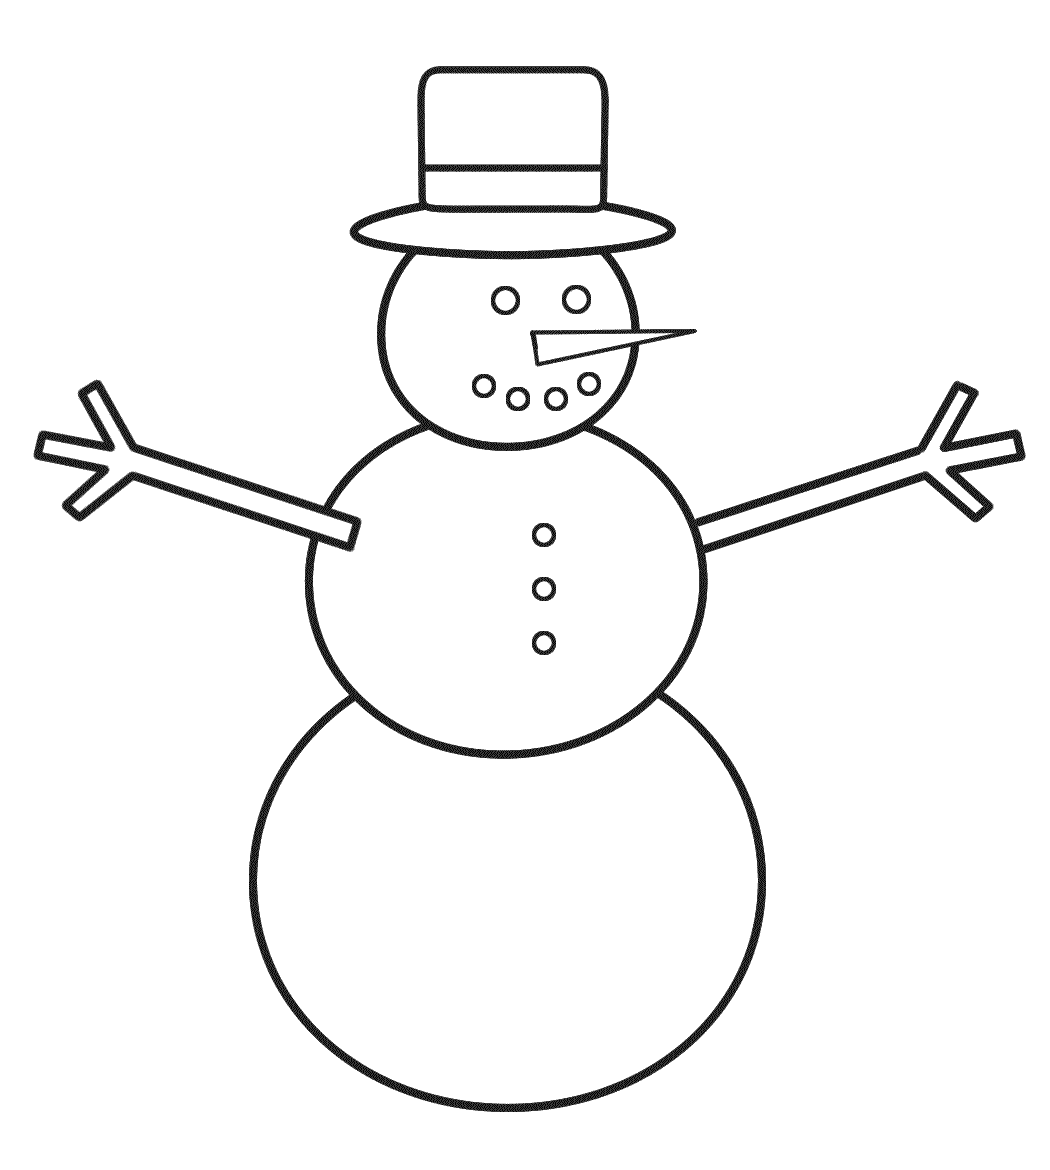 Coloring page - Christmas Snowman